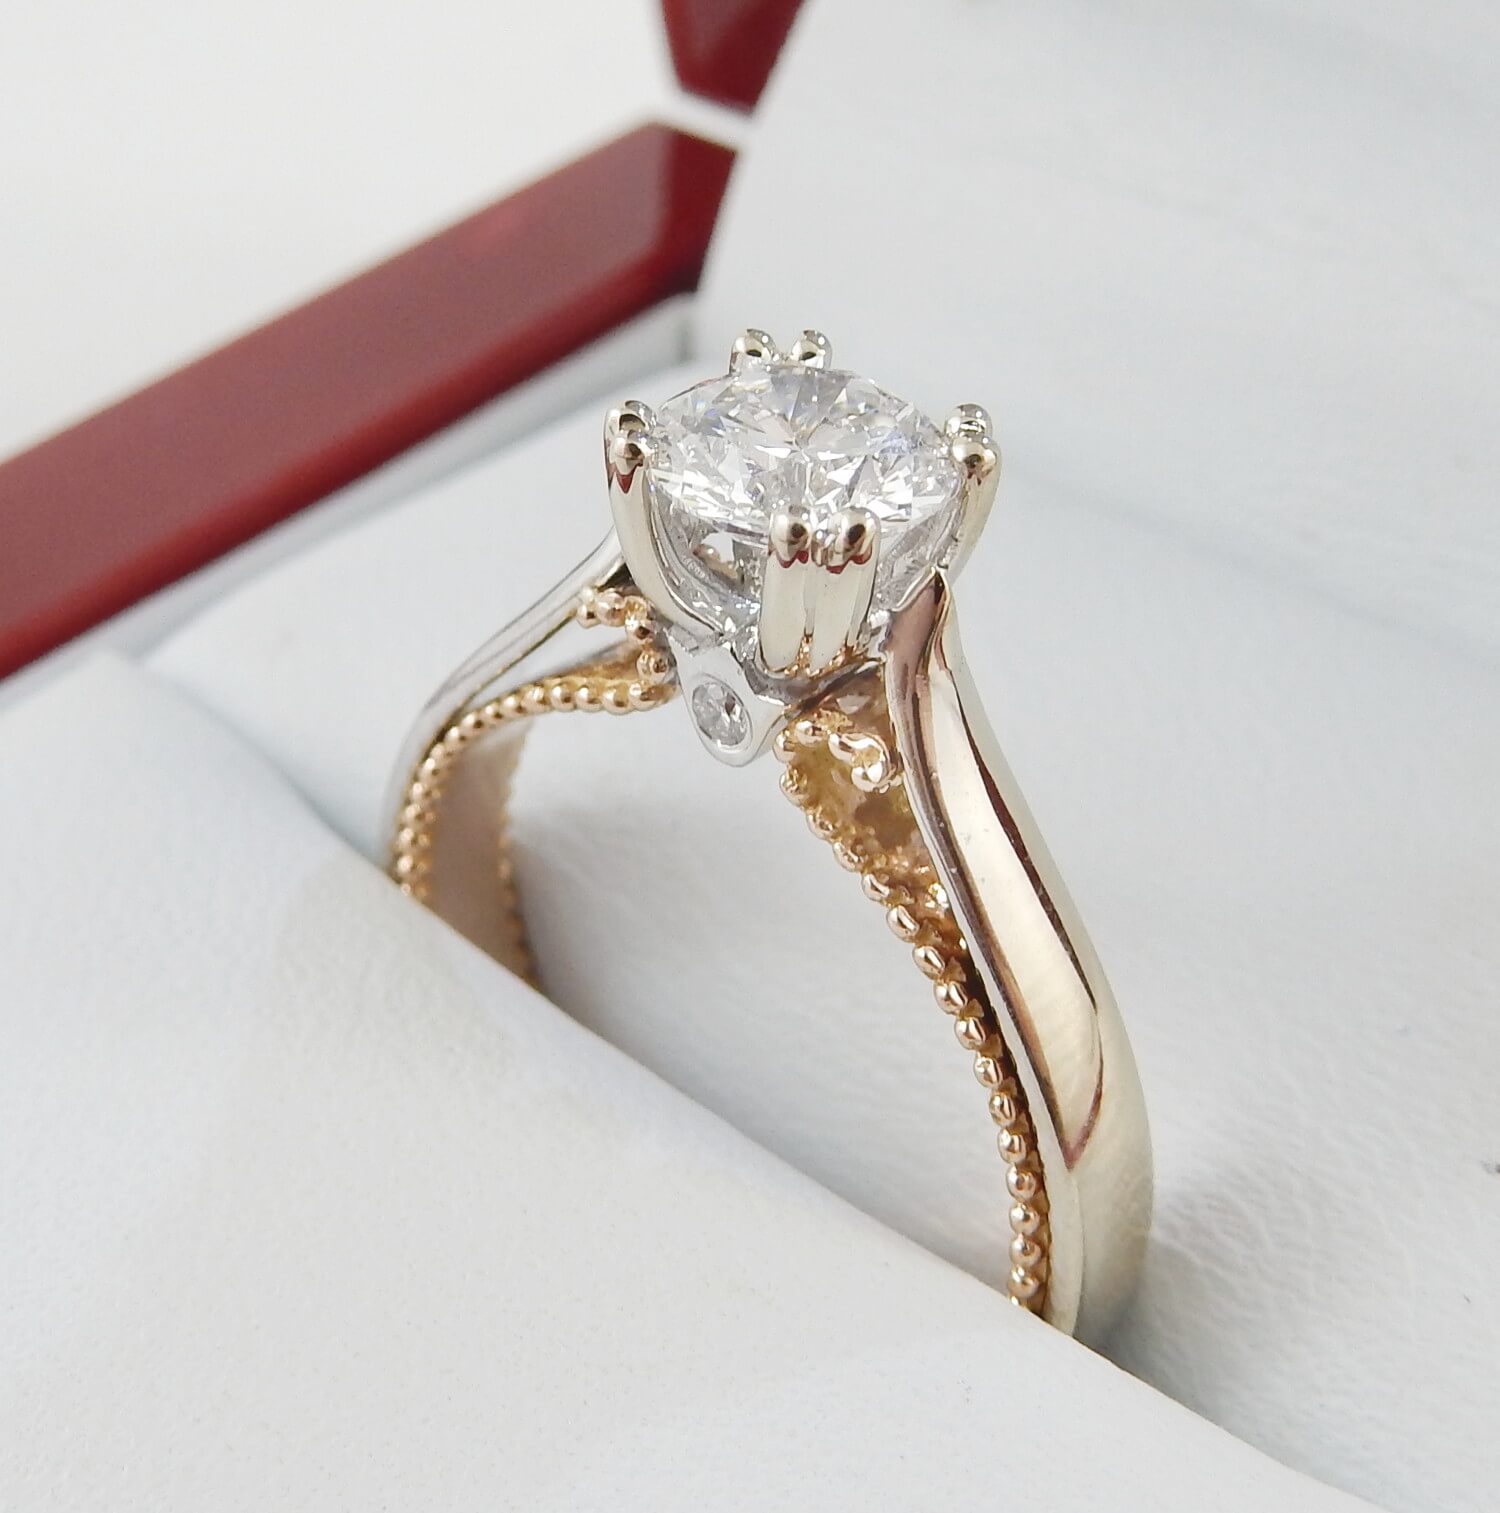  White  and Rose  Gold  0 7ct Solitaire Engagement  Ring  Style 